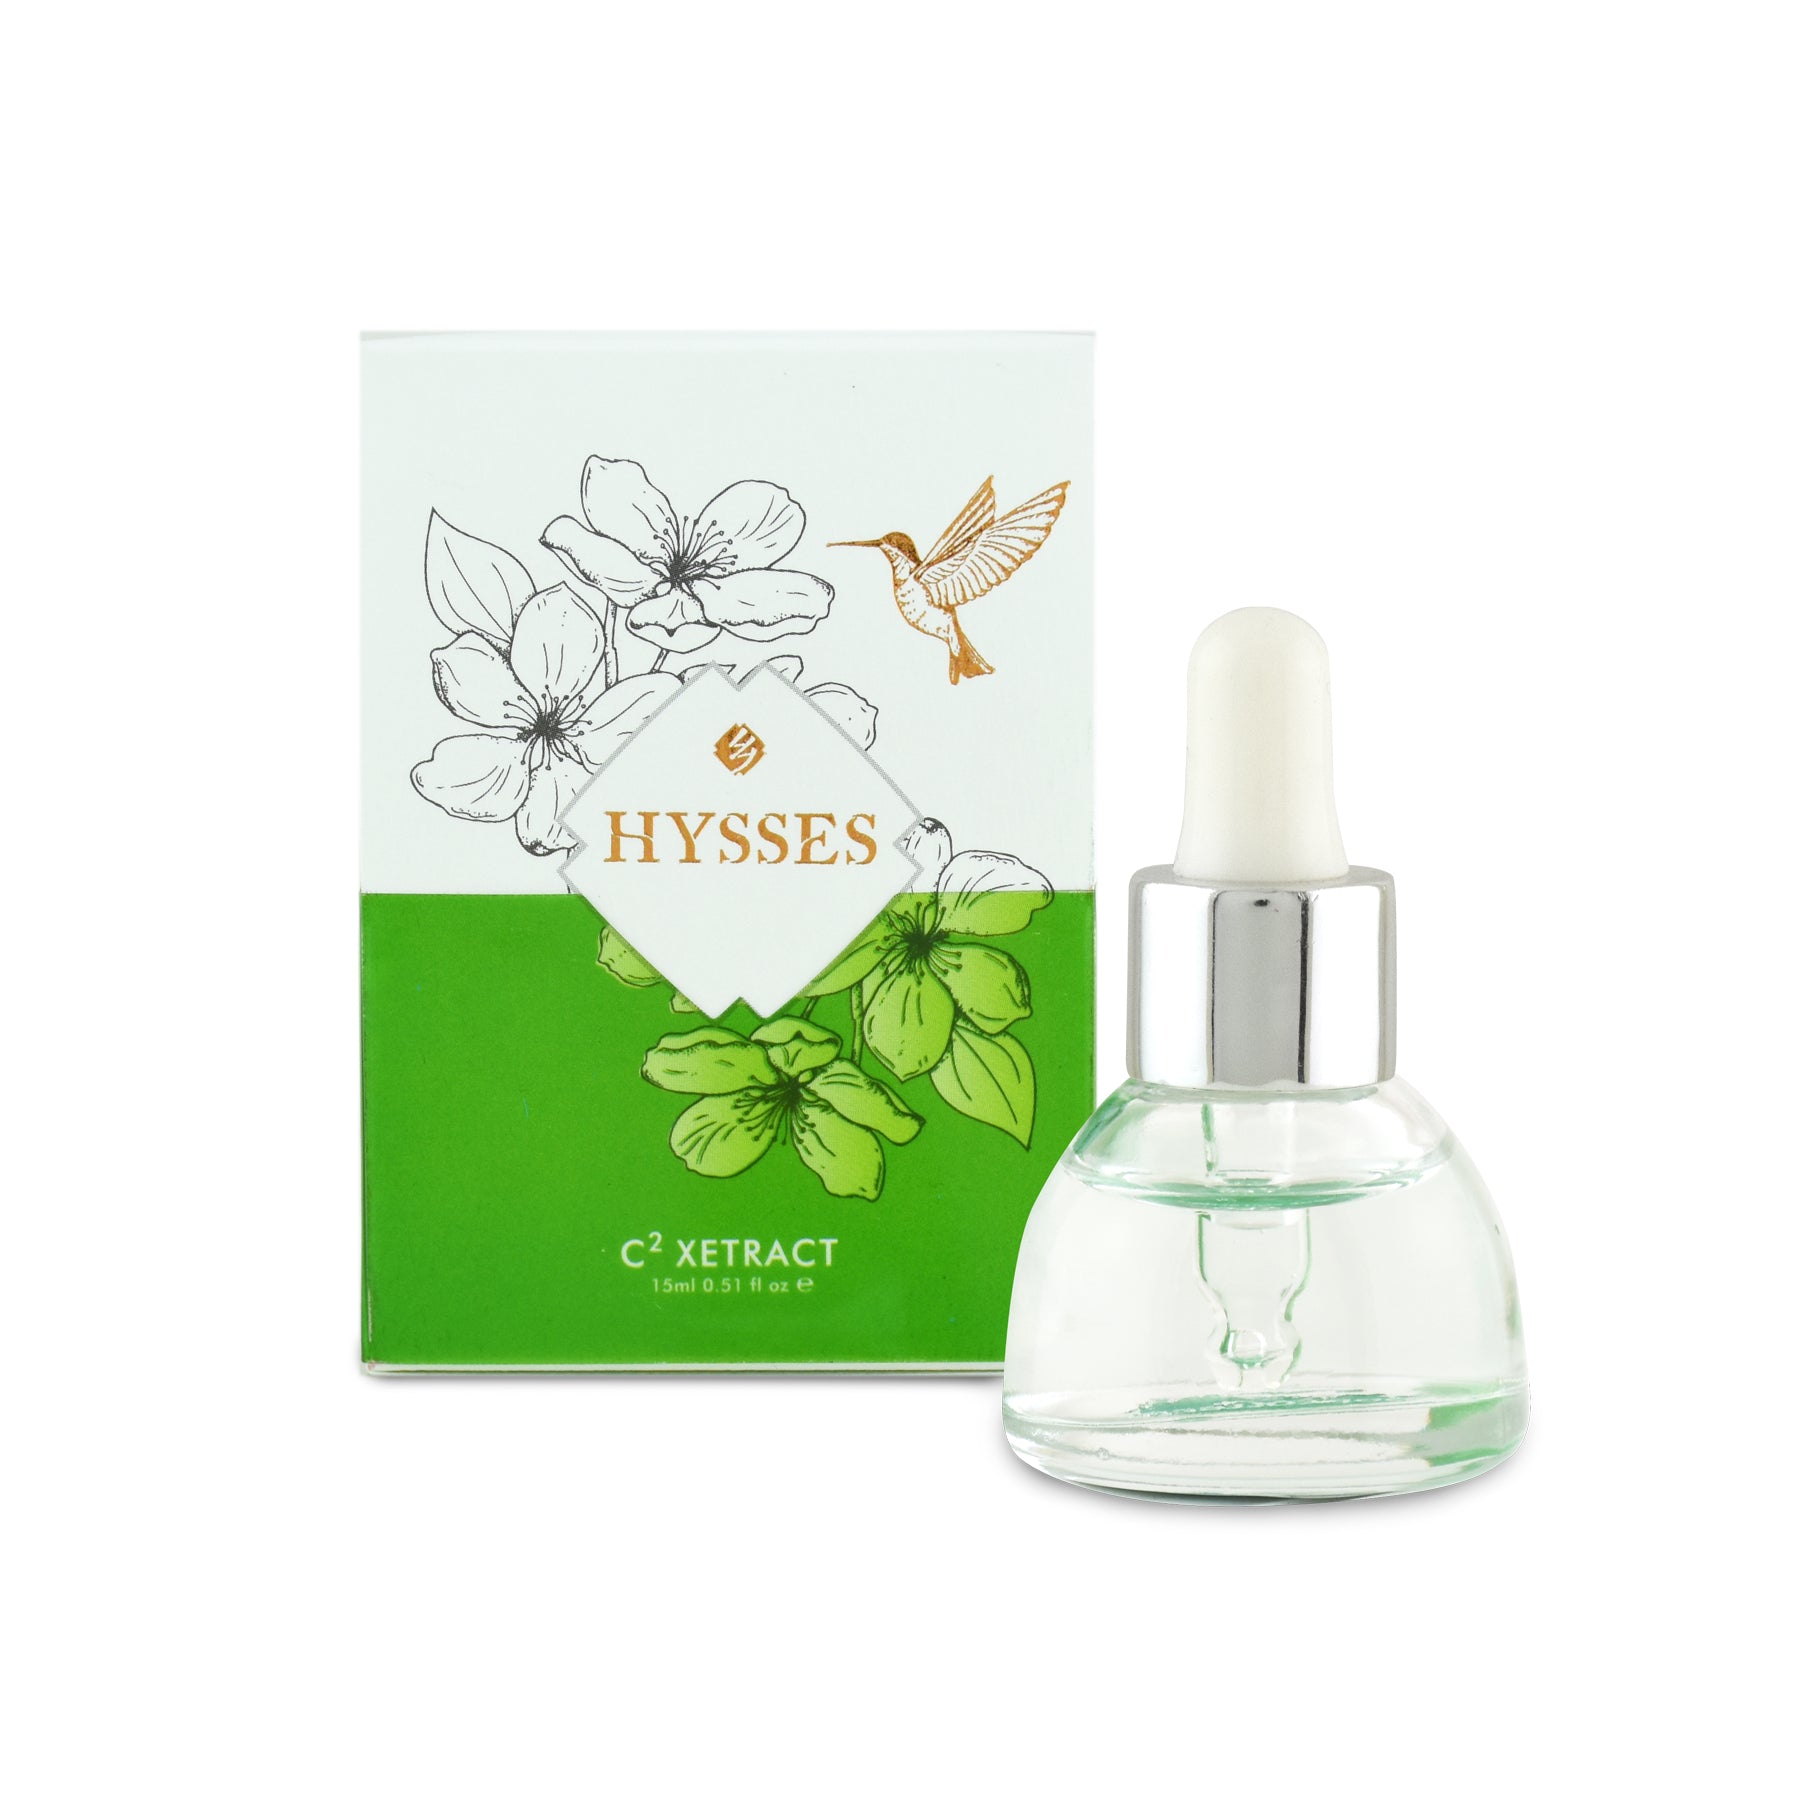 Face Serum C2 Xetract - HYSSES